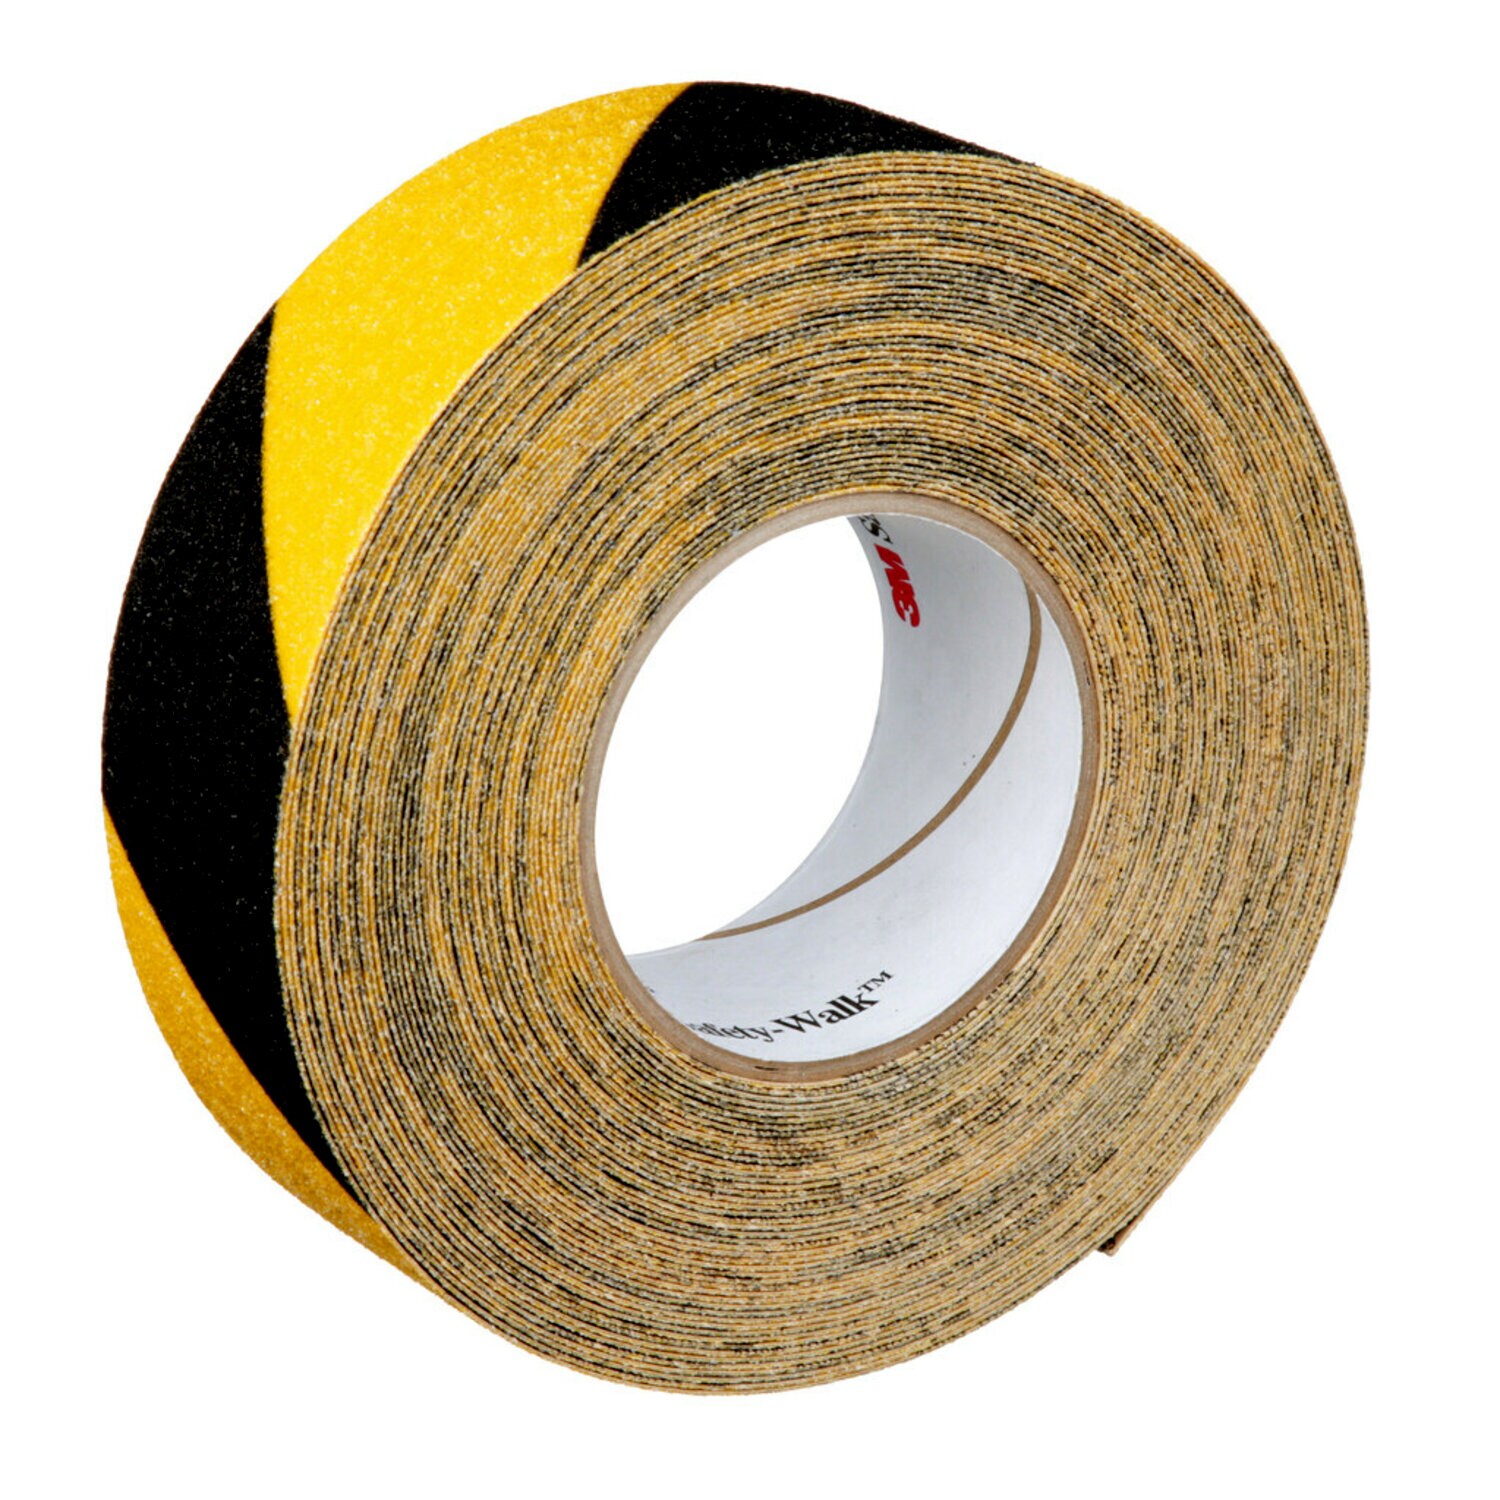 7100133325 - 3M Safety-Walk Slip-Resistant General Purpose Tapes & Treads 613,
Black/Yellow Stripe, 2 in x 60 ft, 2 Rolls/Case